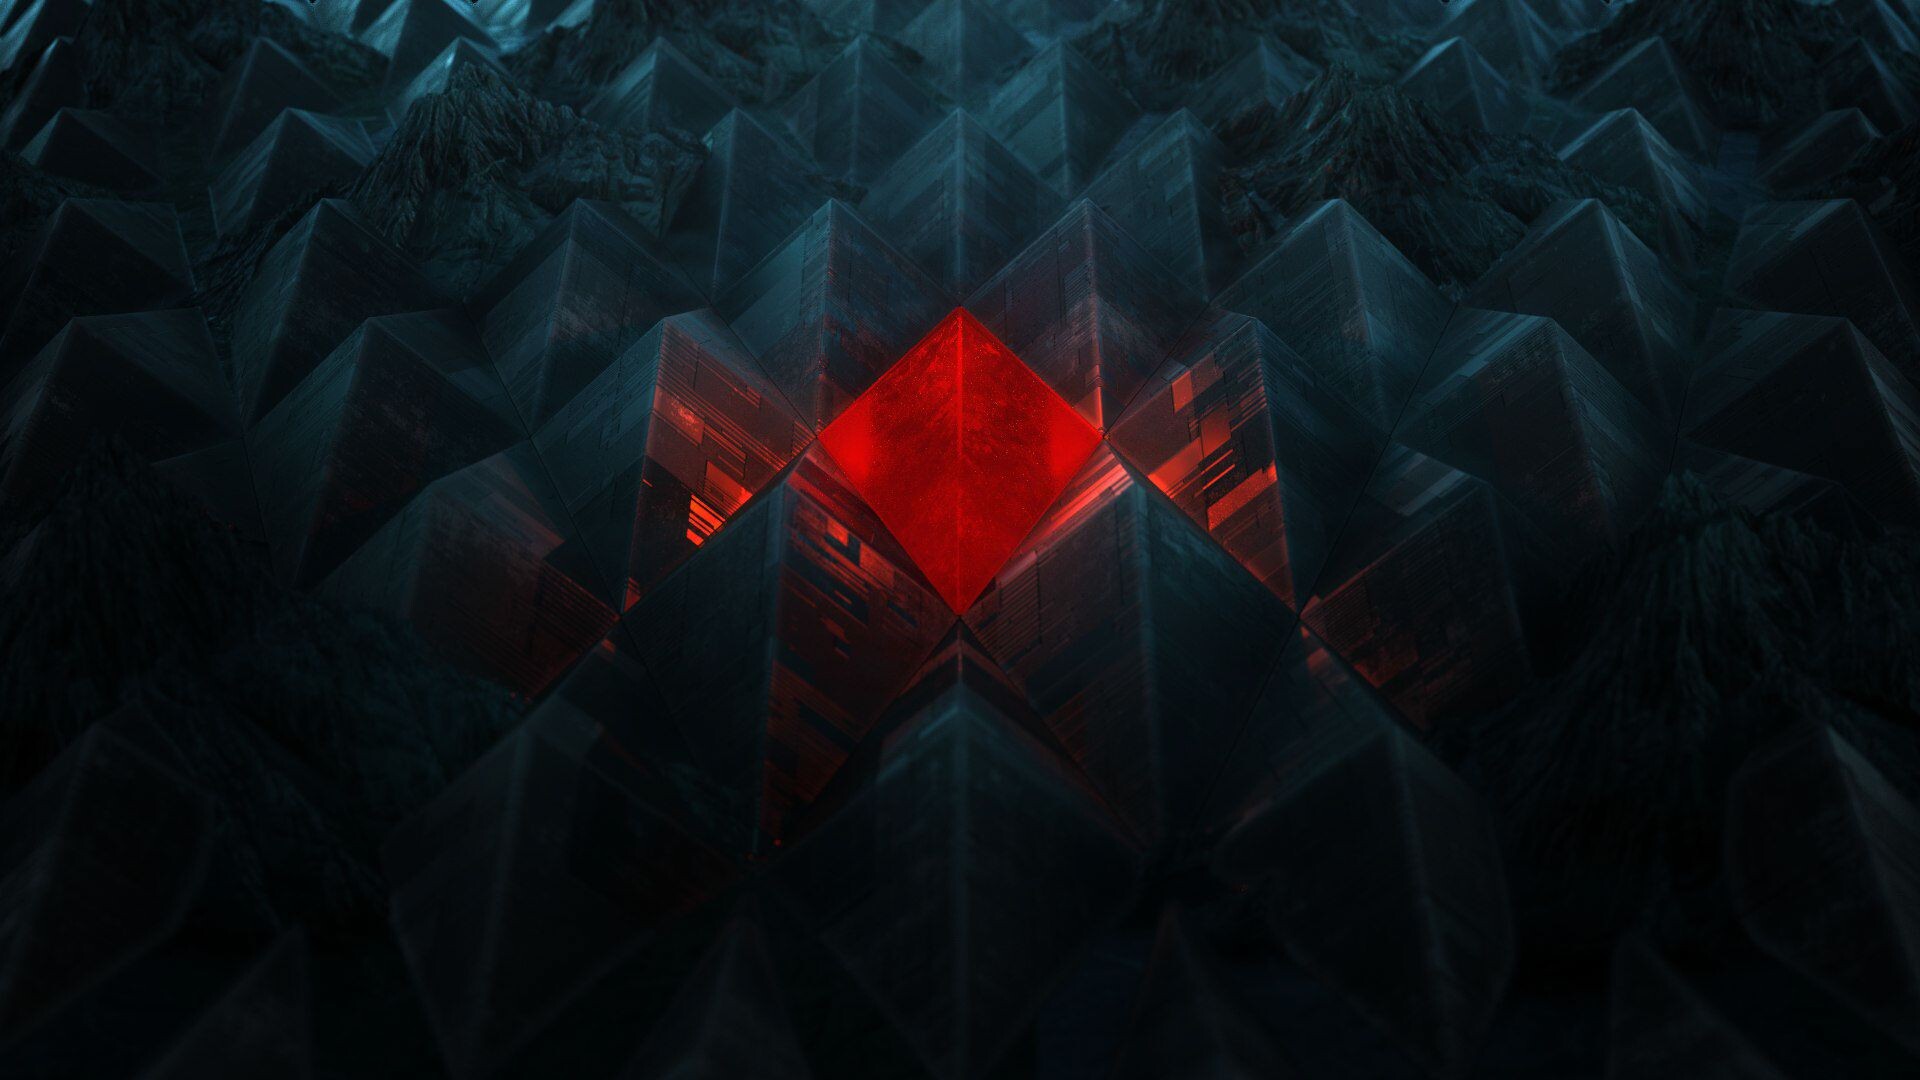 Geometric Abstract: Pyramids, Three-dimensional figures, Obtuse angled triangles. 1920x1080 Full HD Wallpaper.